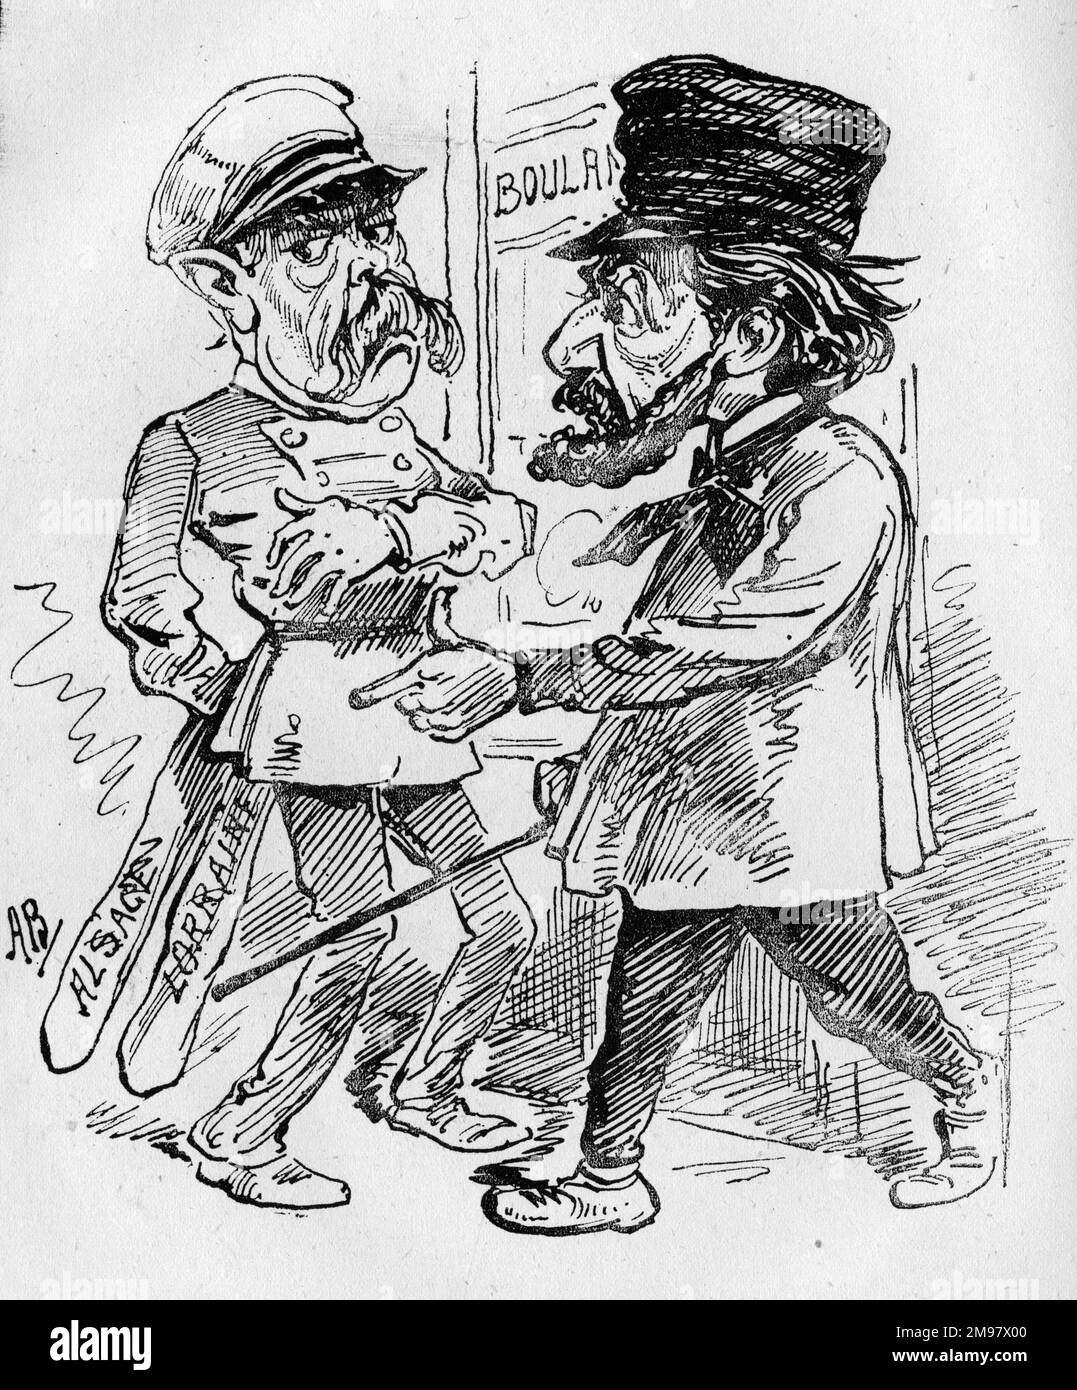 Cartoon, Bismarck and Gambetta. Leon Gambetta, French statesman, is looking for some stolen property (Alsace and Lorraine), which Otto von Bismarck, German Chancellor, is hiding behind his back. A comment on the difficult relationship following the Franco-Prussian War, when France had been forced to surrender territory to Germany. Stock Photo